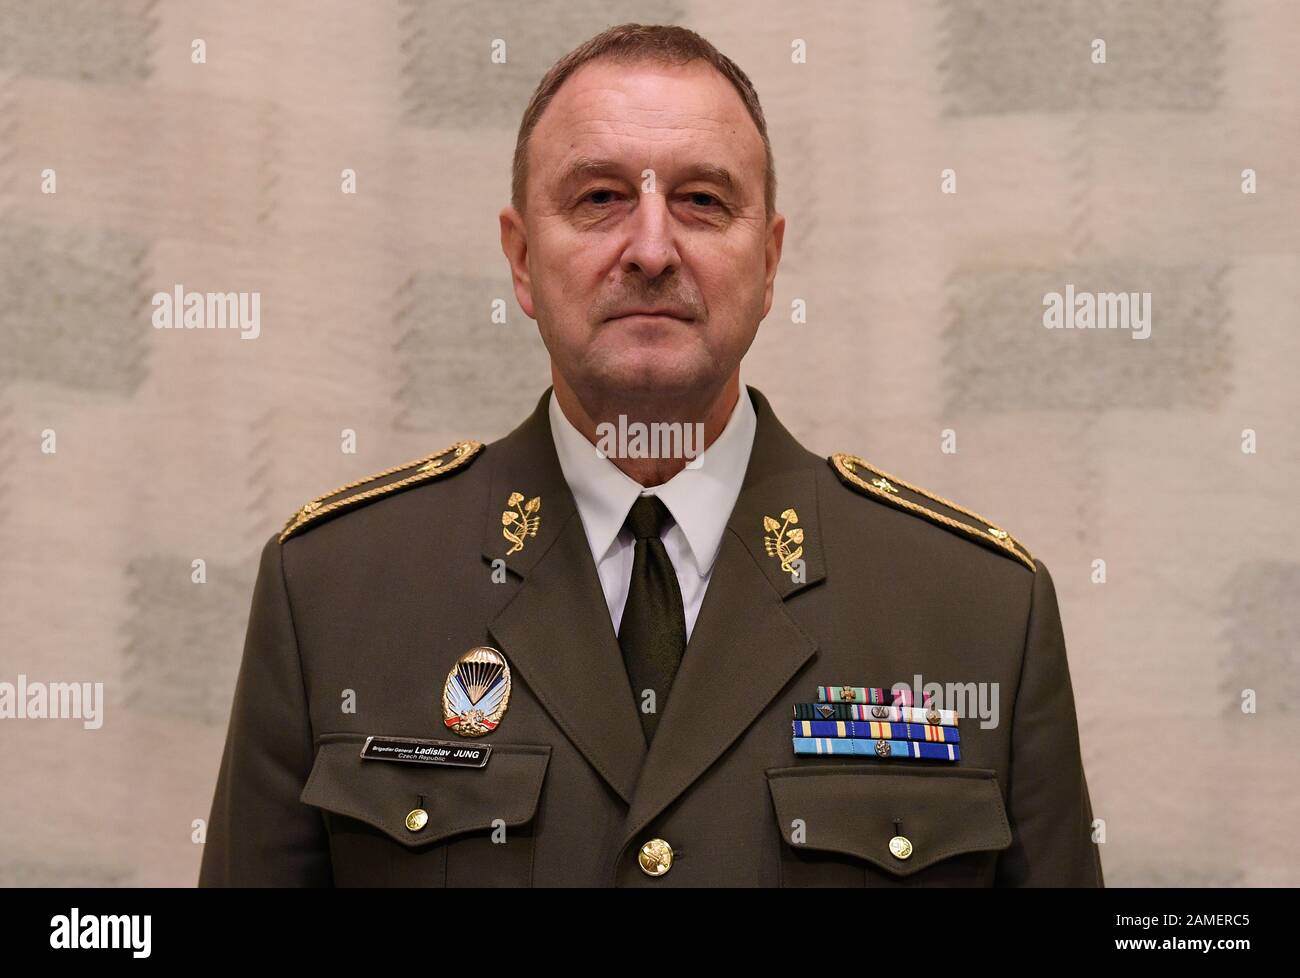 Brigadier General Ladislav Jung, pictured, officially took up the command of the Czech Land Forces on January 8, 2019, in Prague, Czech Republic, replacing Major General Josef Kopecky who will head the newly established Operational Command. (CTK Photo/Ondrej Deml) Stock Photo